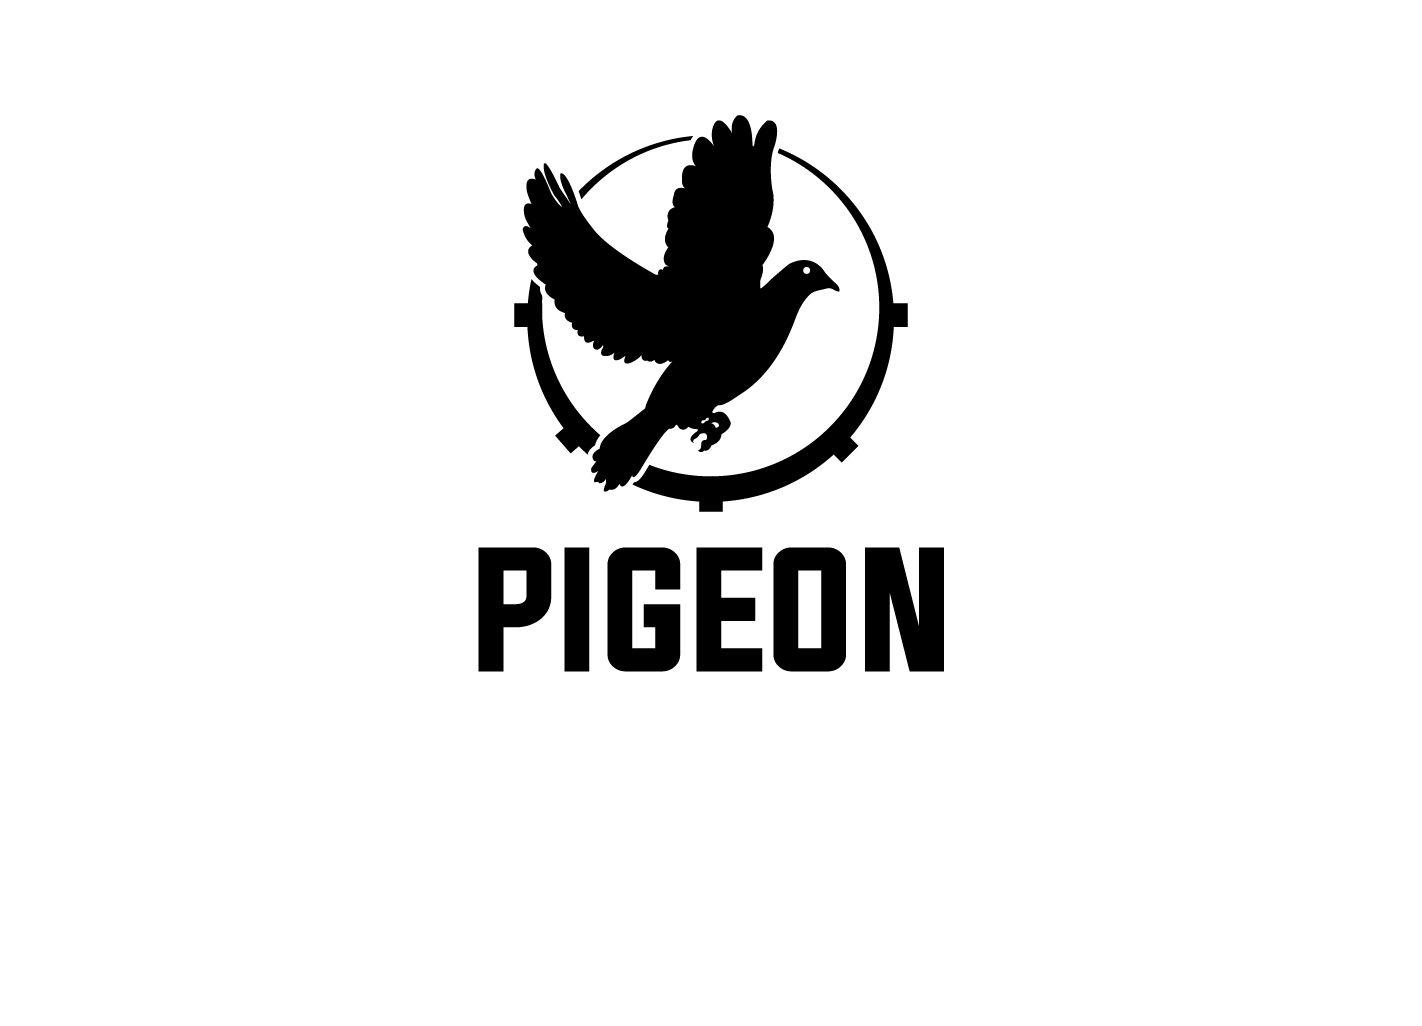 Pigeon Logo - Masculine, Professional, Entertainment Industry Logo Design for ...